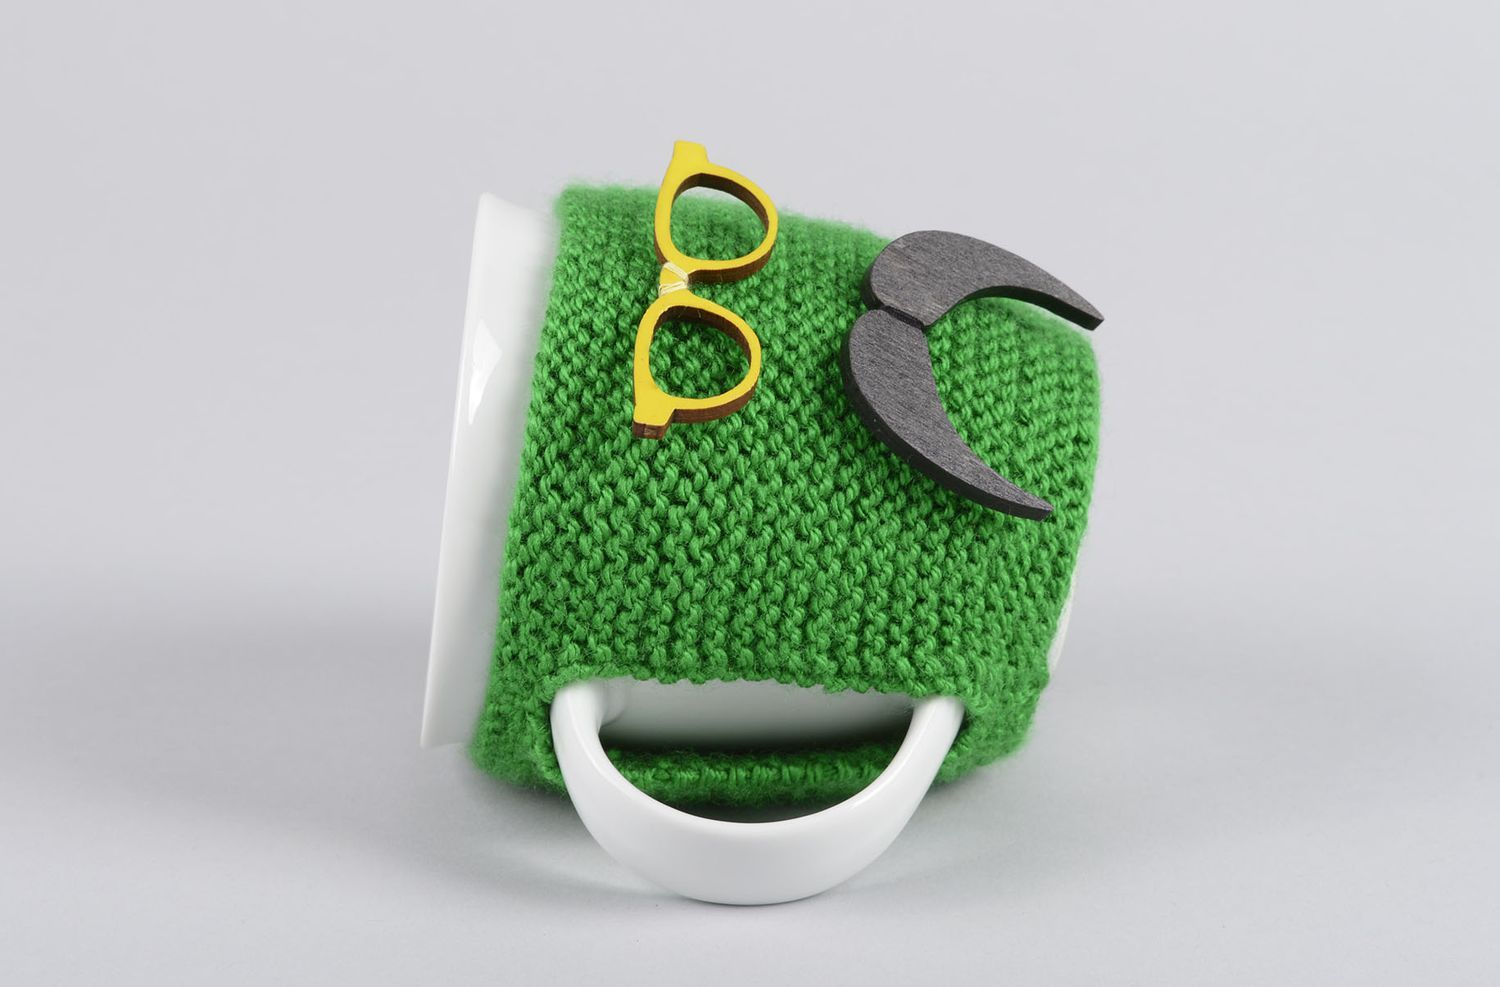 White ceramic porcelain teacup with handle and green man with mustache knitted cover photo 3